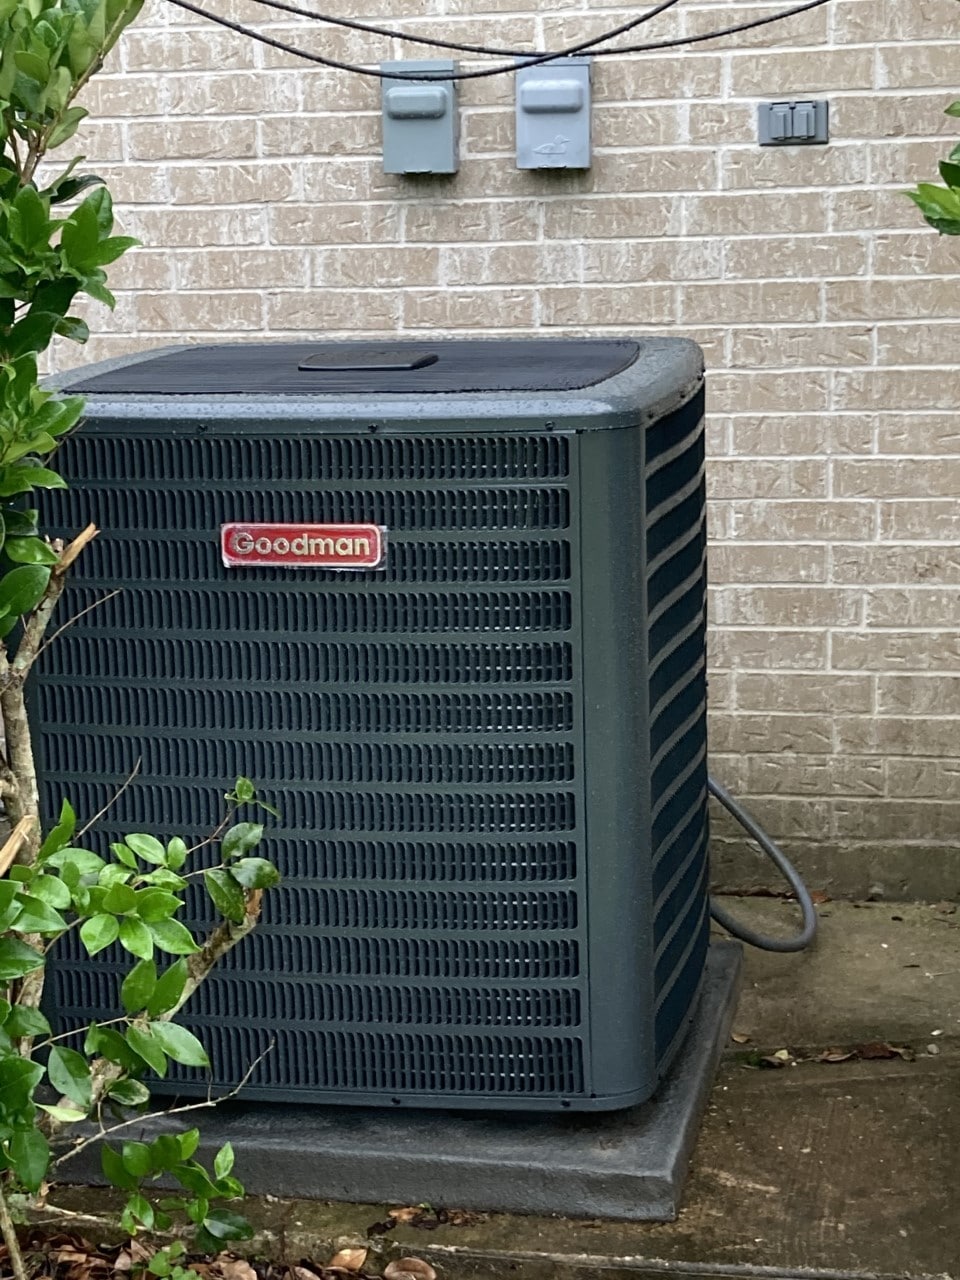 Air Conditioner Installed Outside a Building